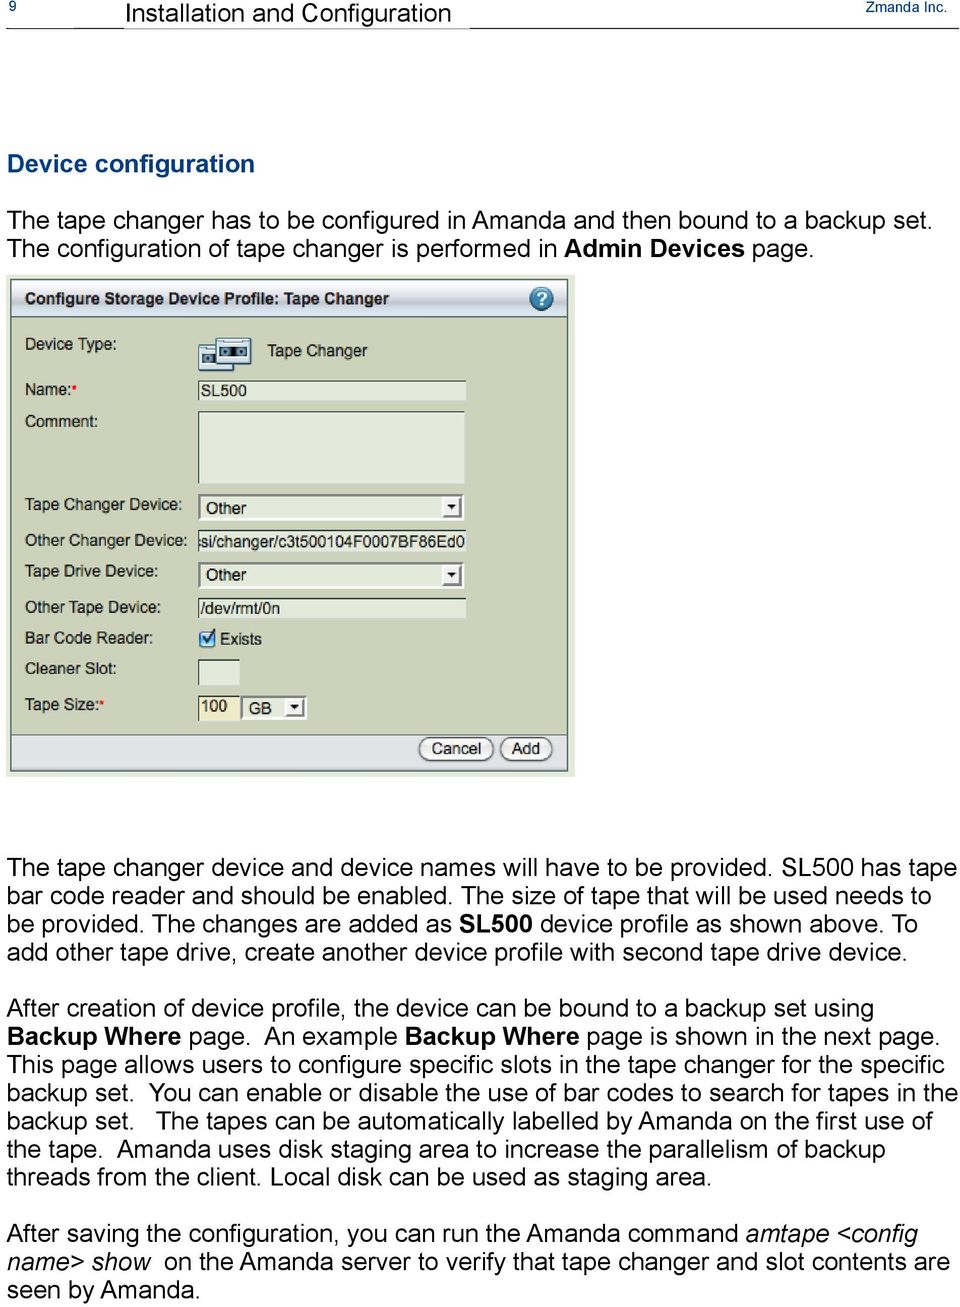 The changes are added as SL500 device profile as shown above. To add other tape drive, create another device profile with second tape drive device.